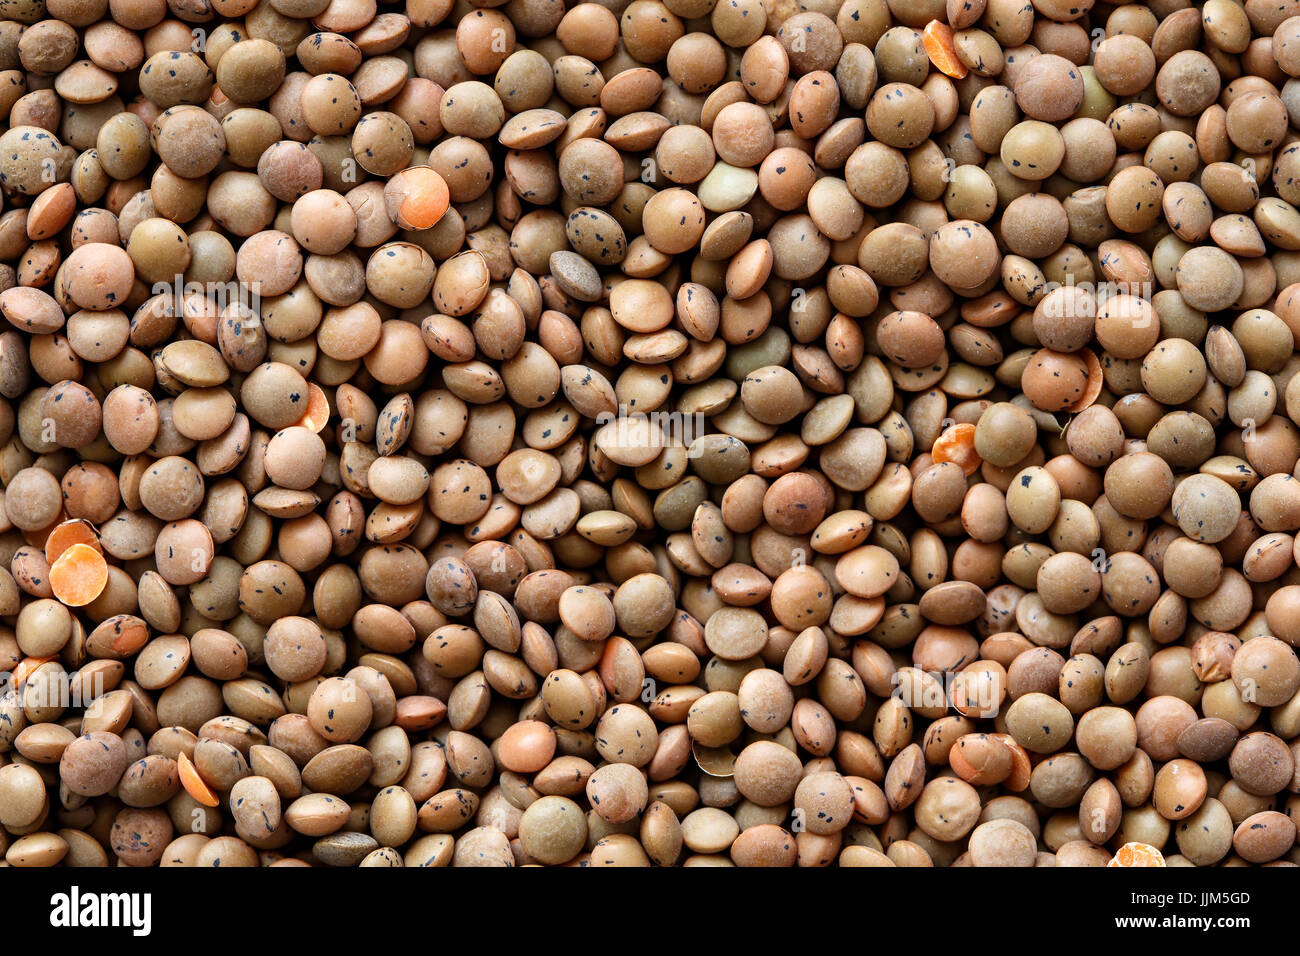 Background of unpeeled red lentils. Stock Photo